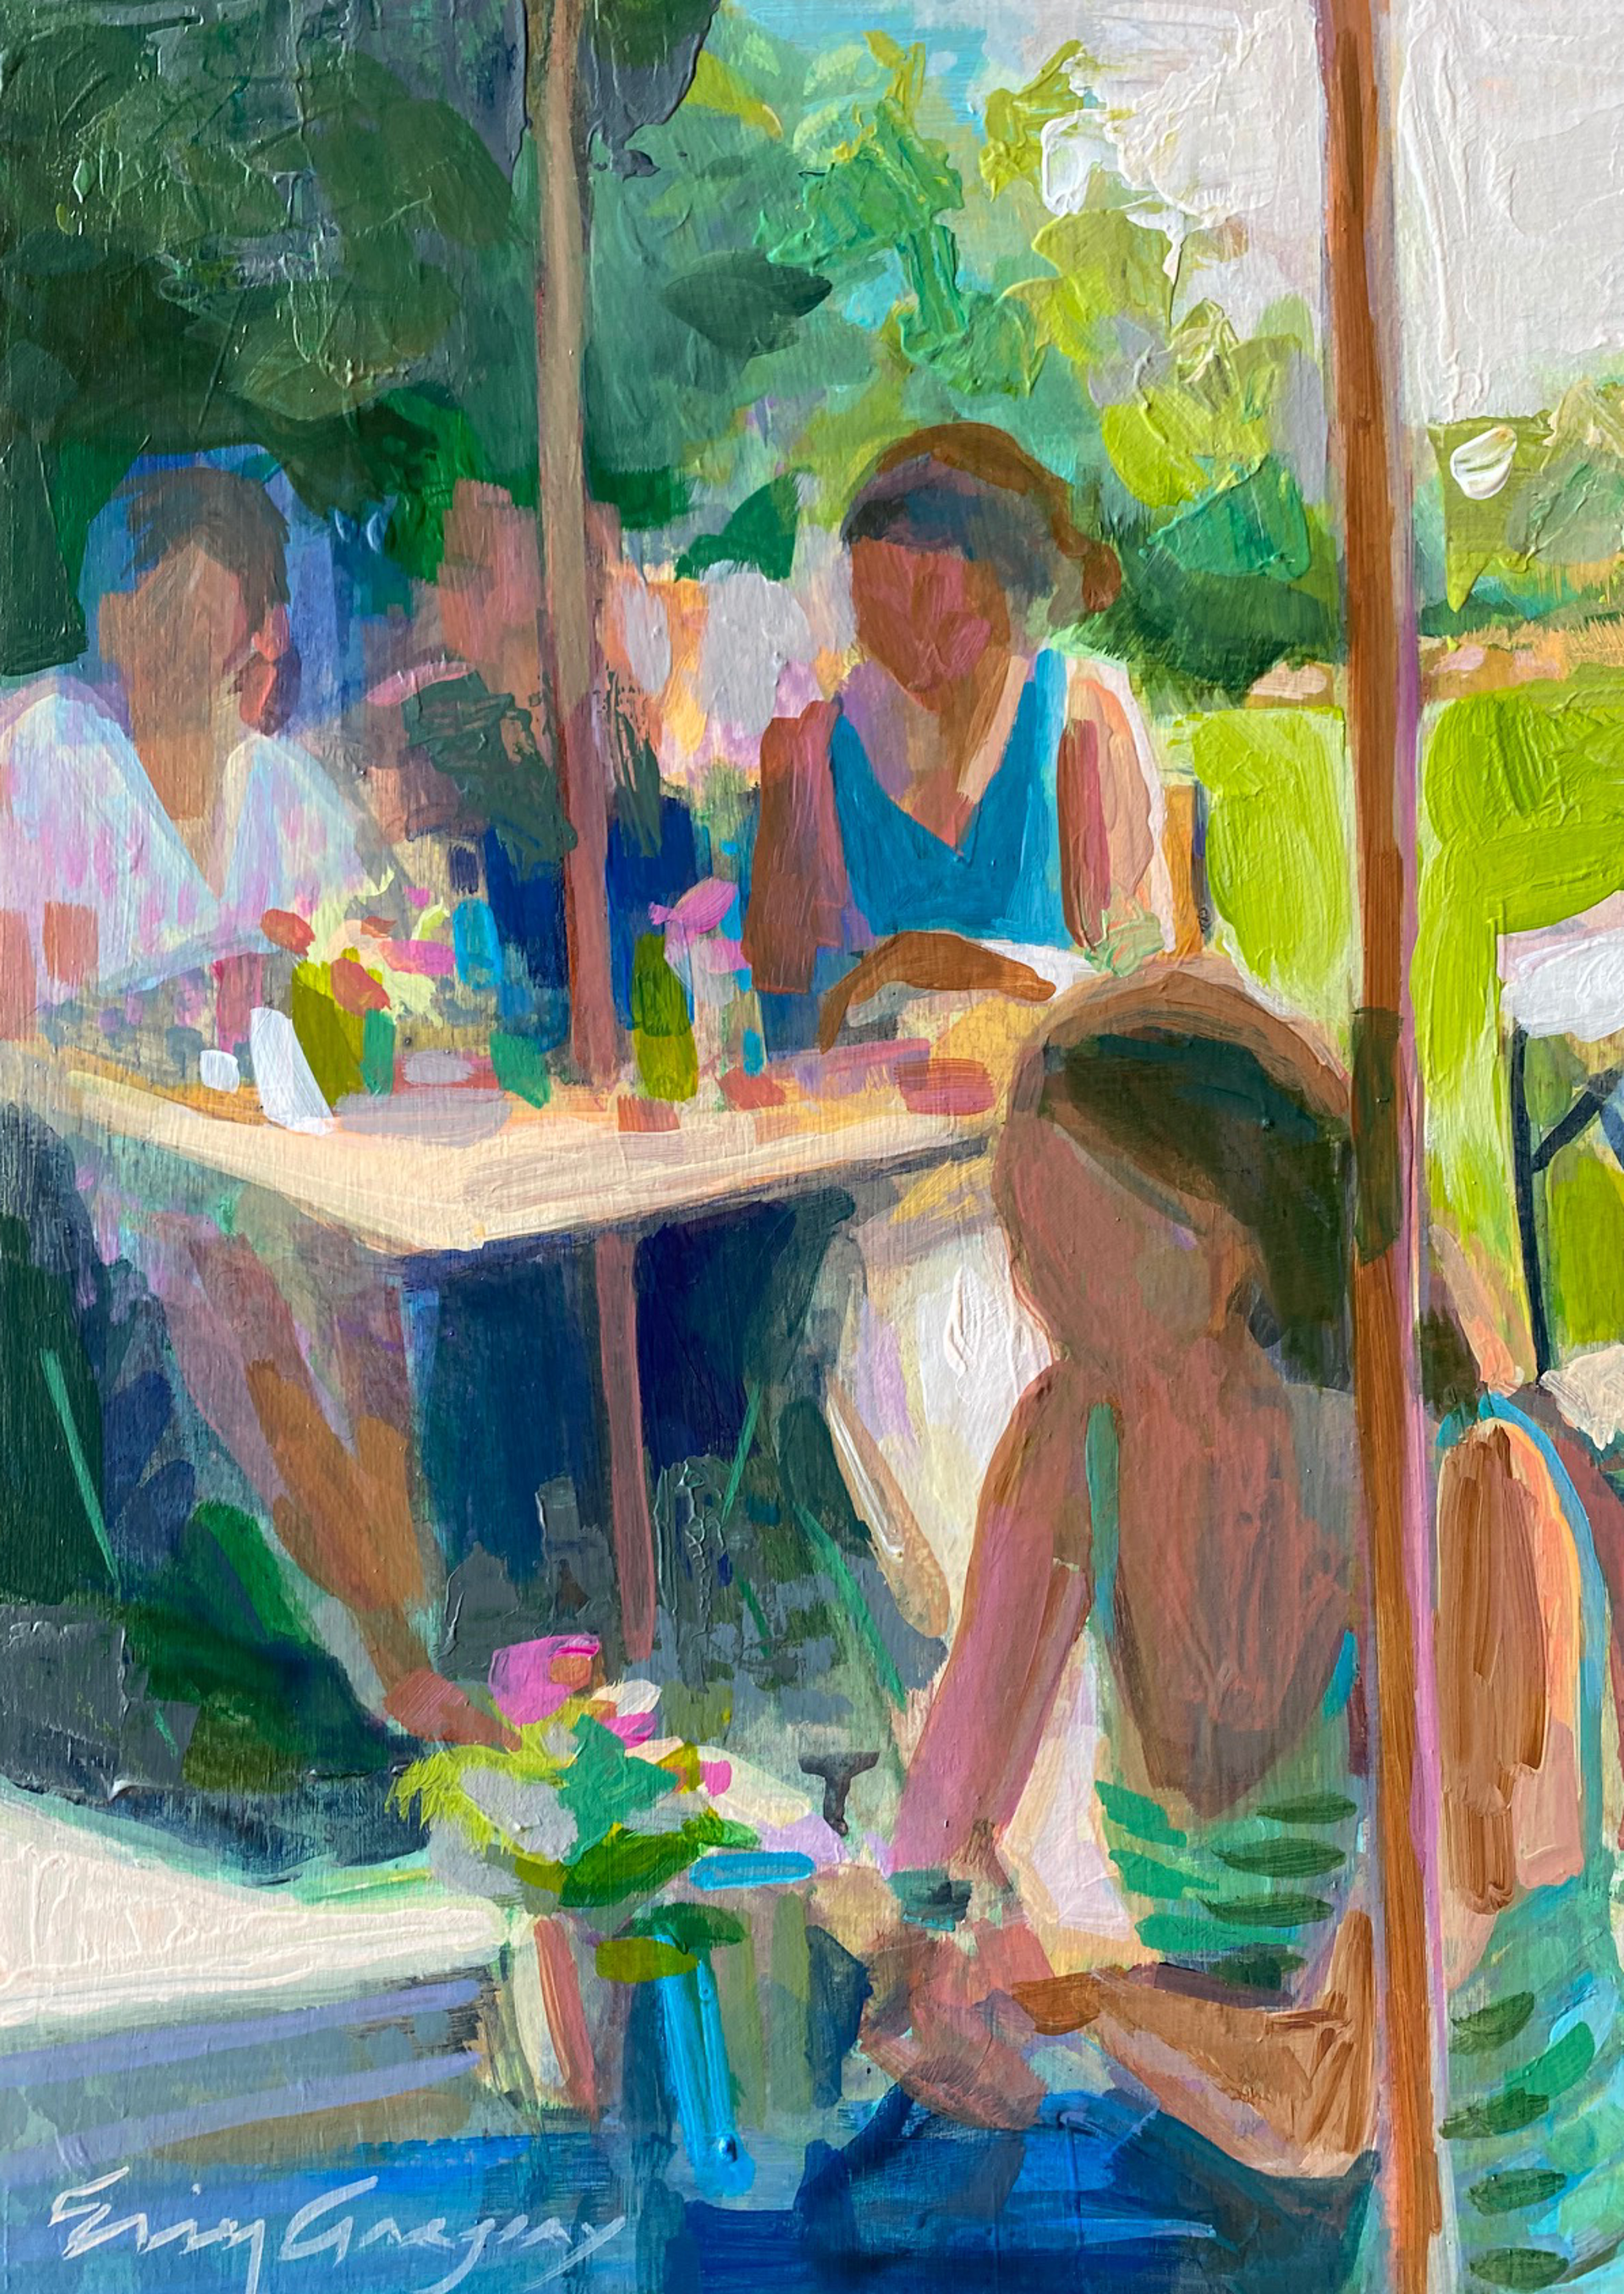 Lunch with Friends 3 by Erin Gregory